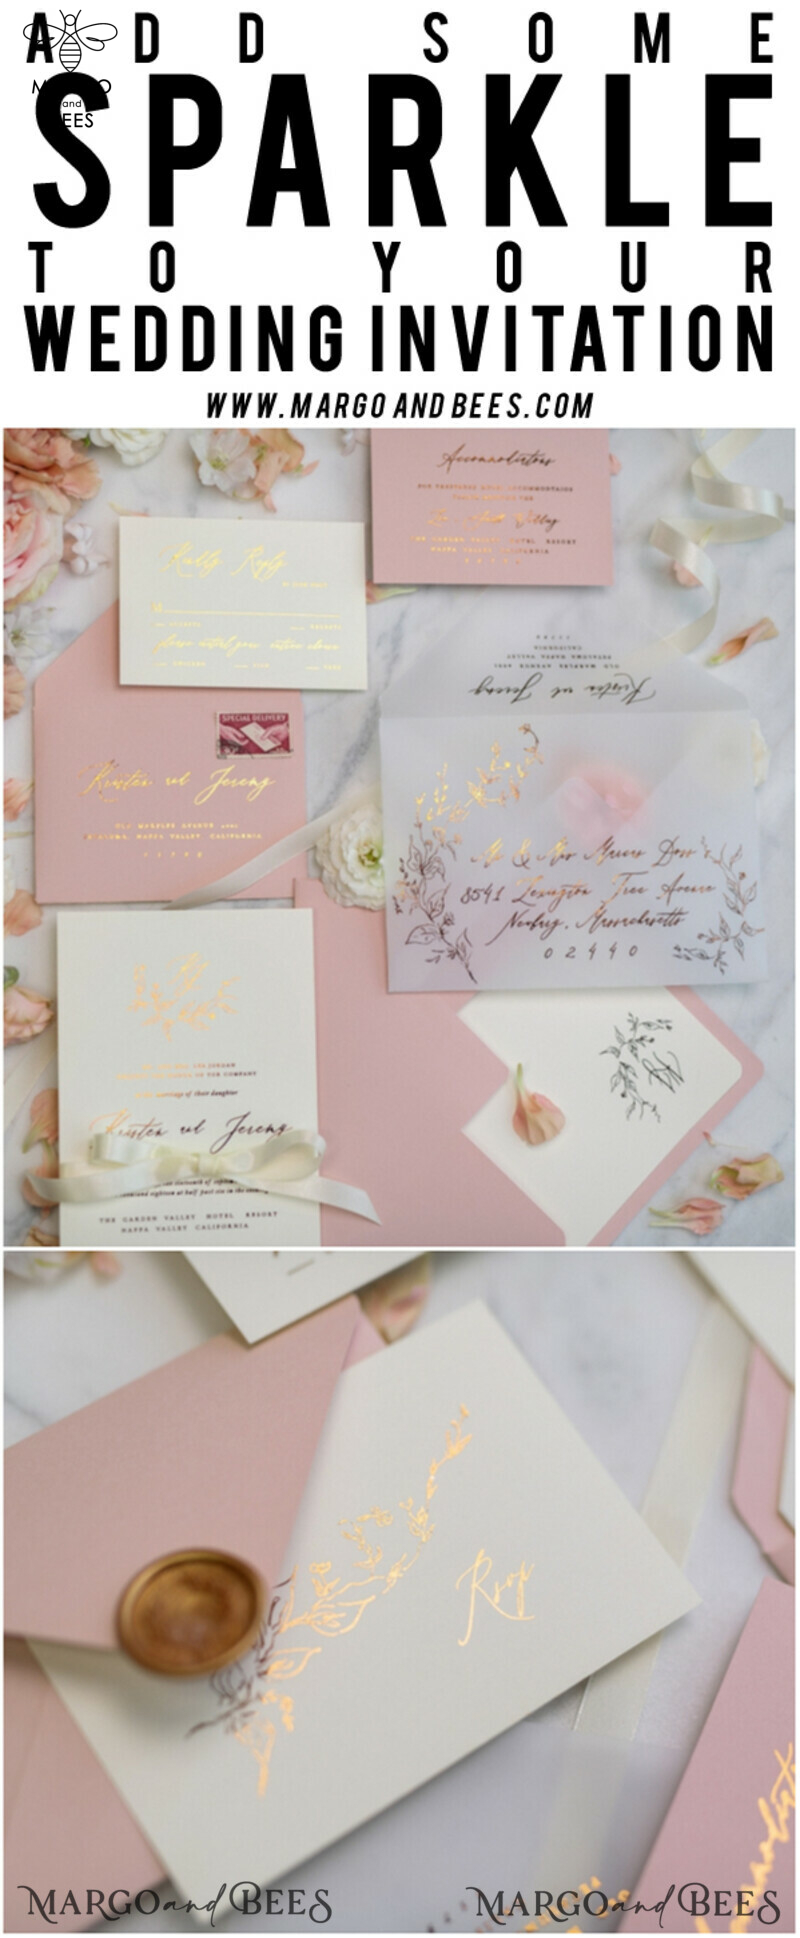 Stunning Blush Pink Wedding Invitations with Glamourous Gold Foil Accents and Elegant Vellum Details: A Bespoke Wedding Invitation Suite-35